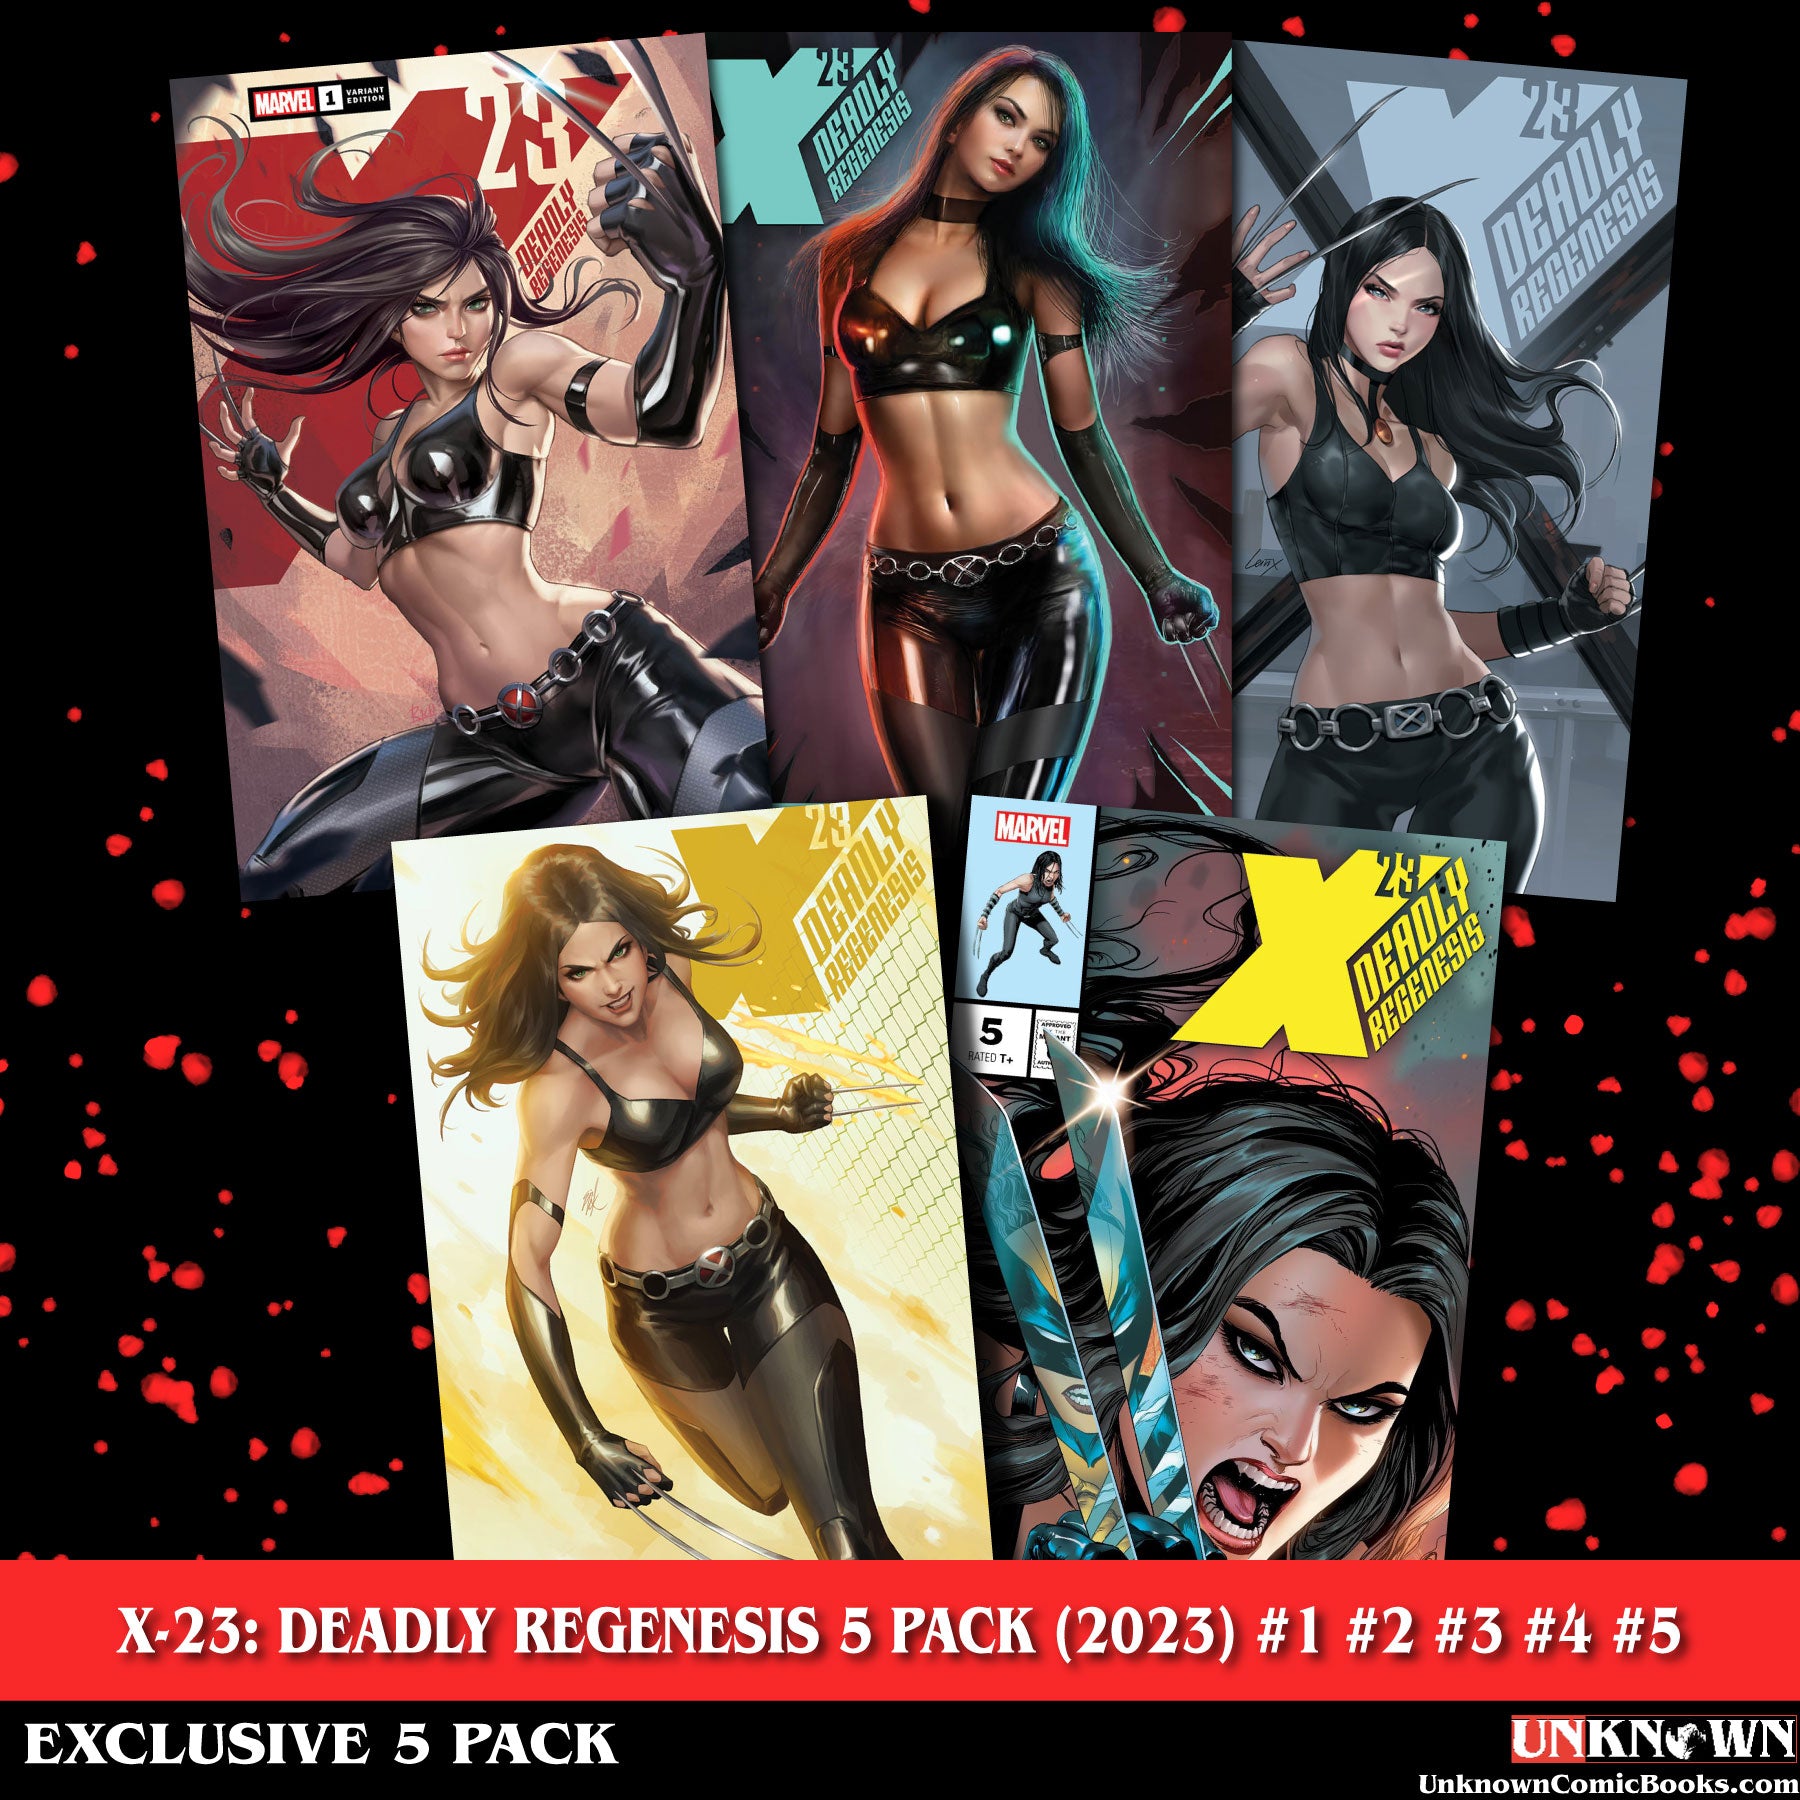 [5 PACK] TRADE X-23: DEADLY REGENESIS #1, #2, #3, #4, #5 UNKNOWN COMICS EXCLUSIVE VAR (07/26/2023)